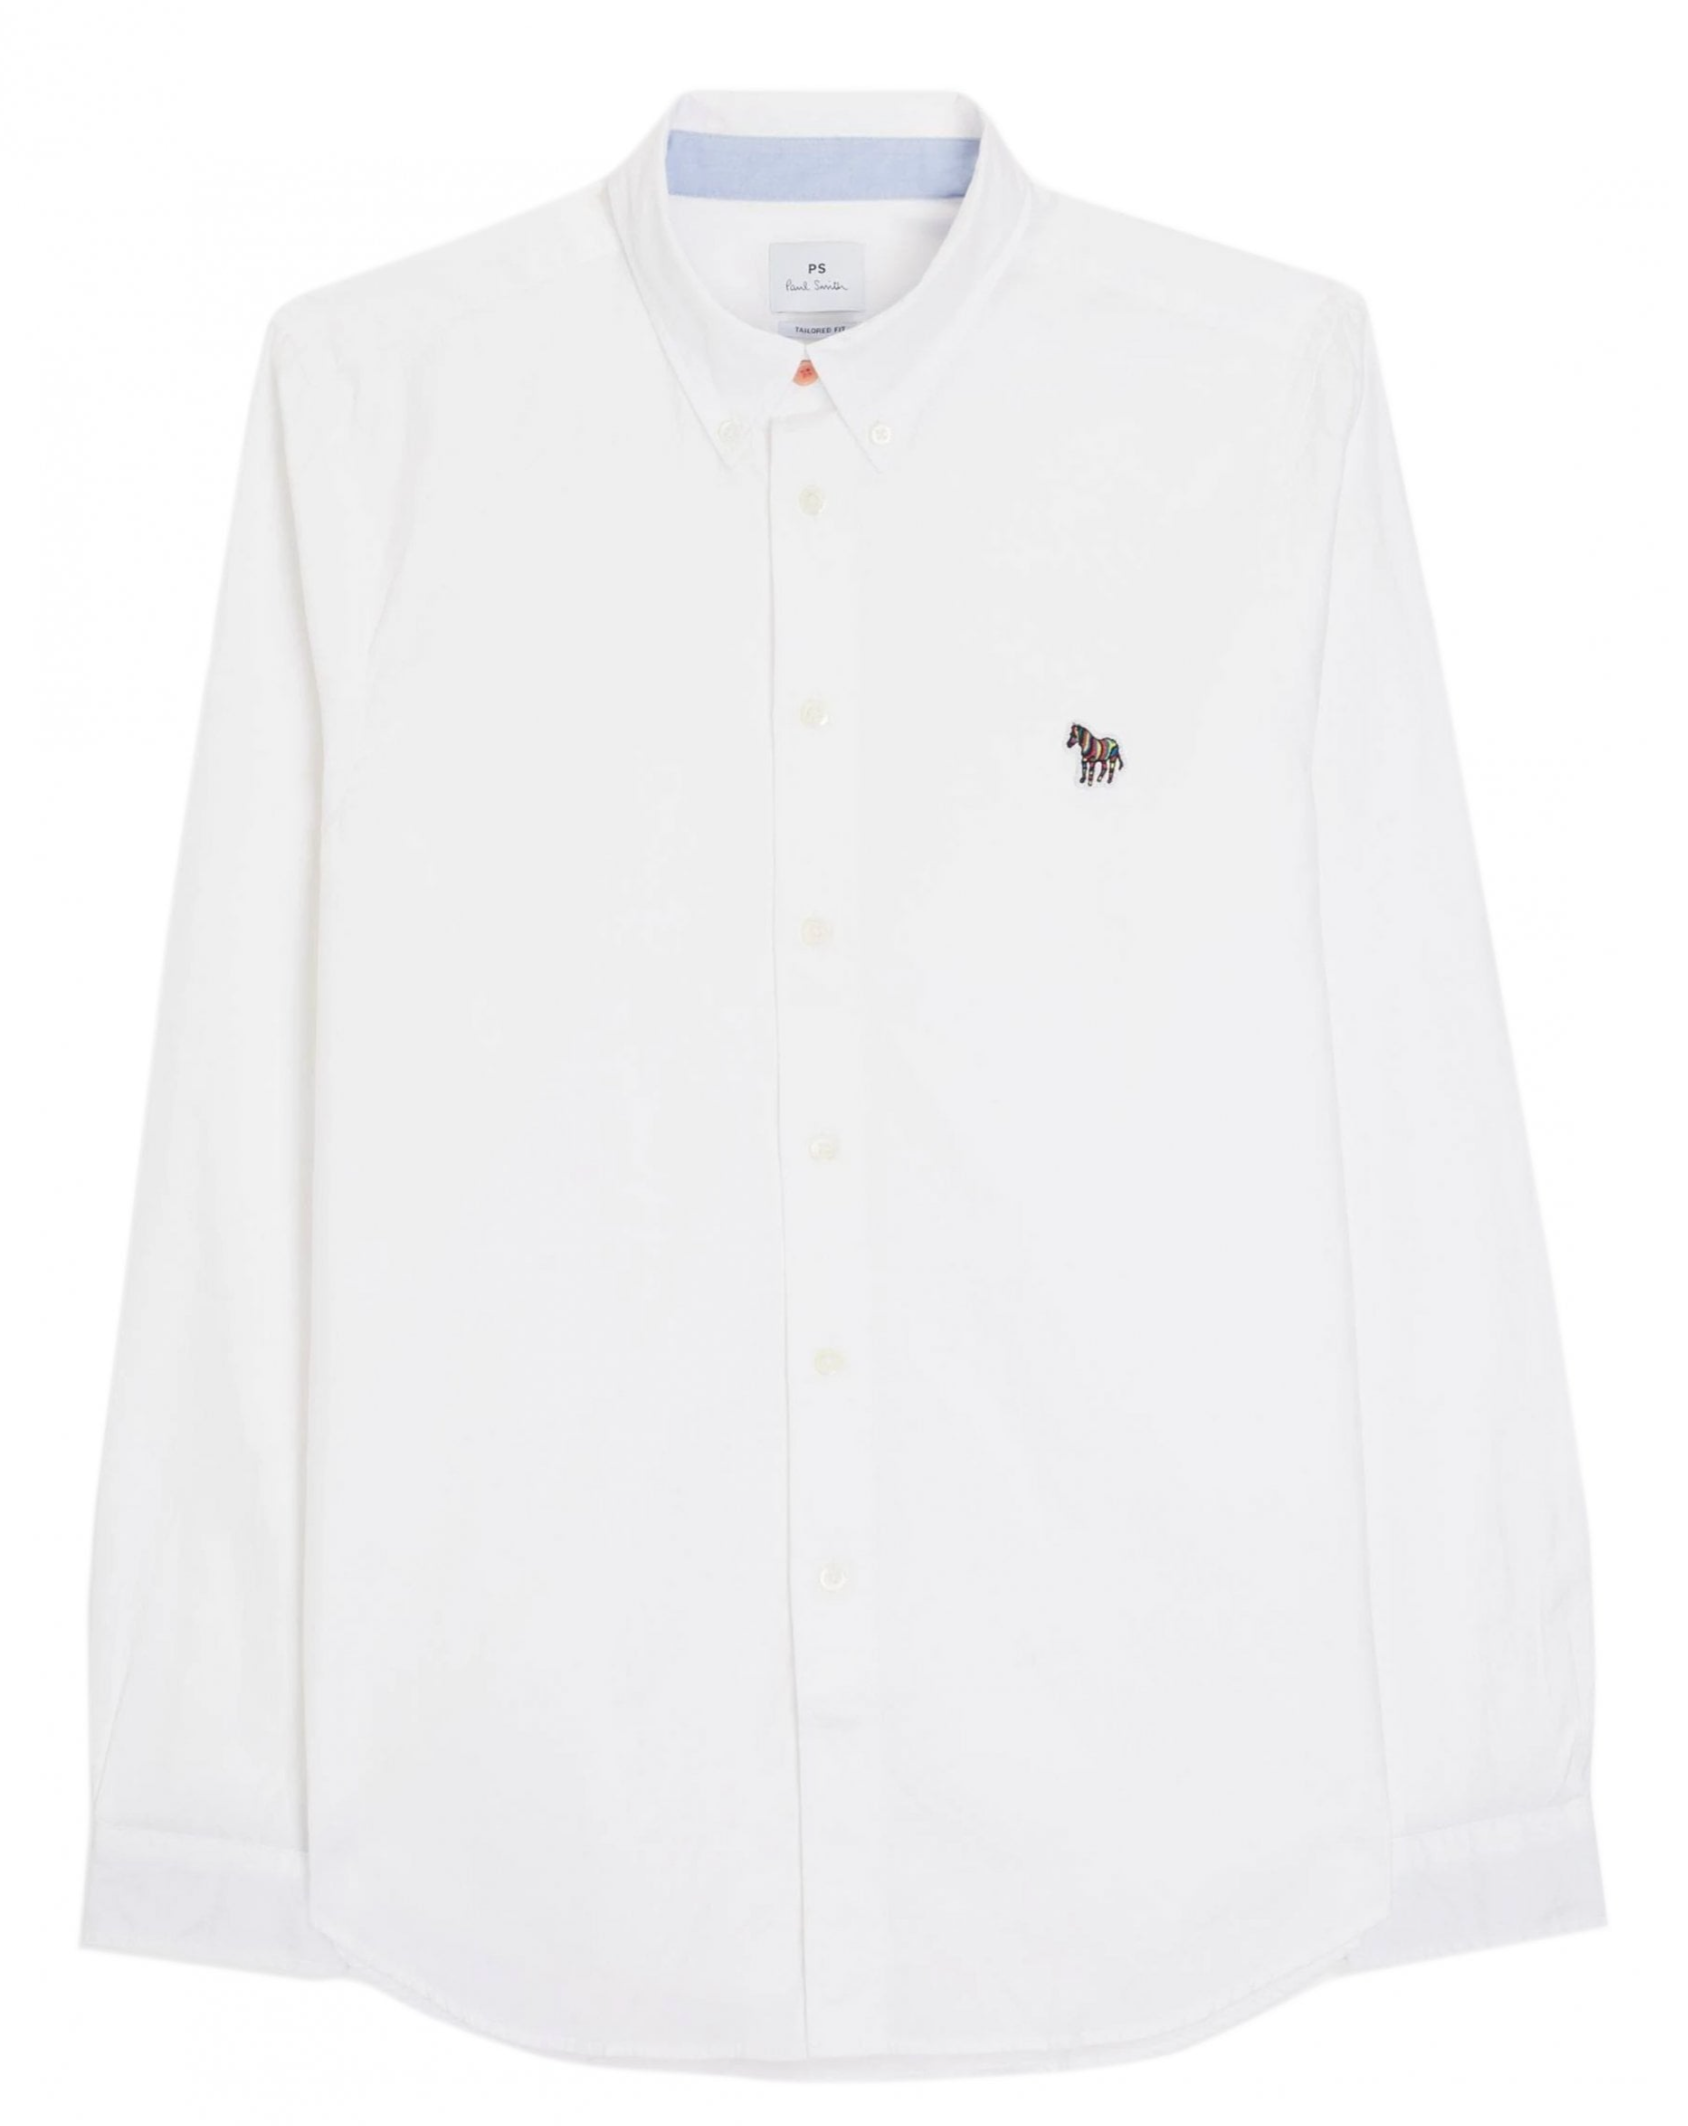 PS by Paul Smith Tailored Shirt Zebra White